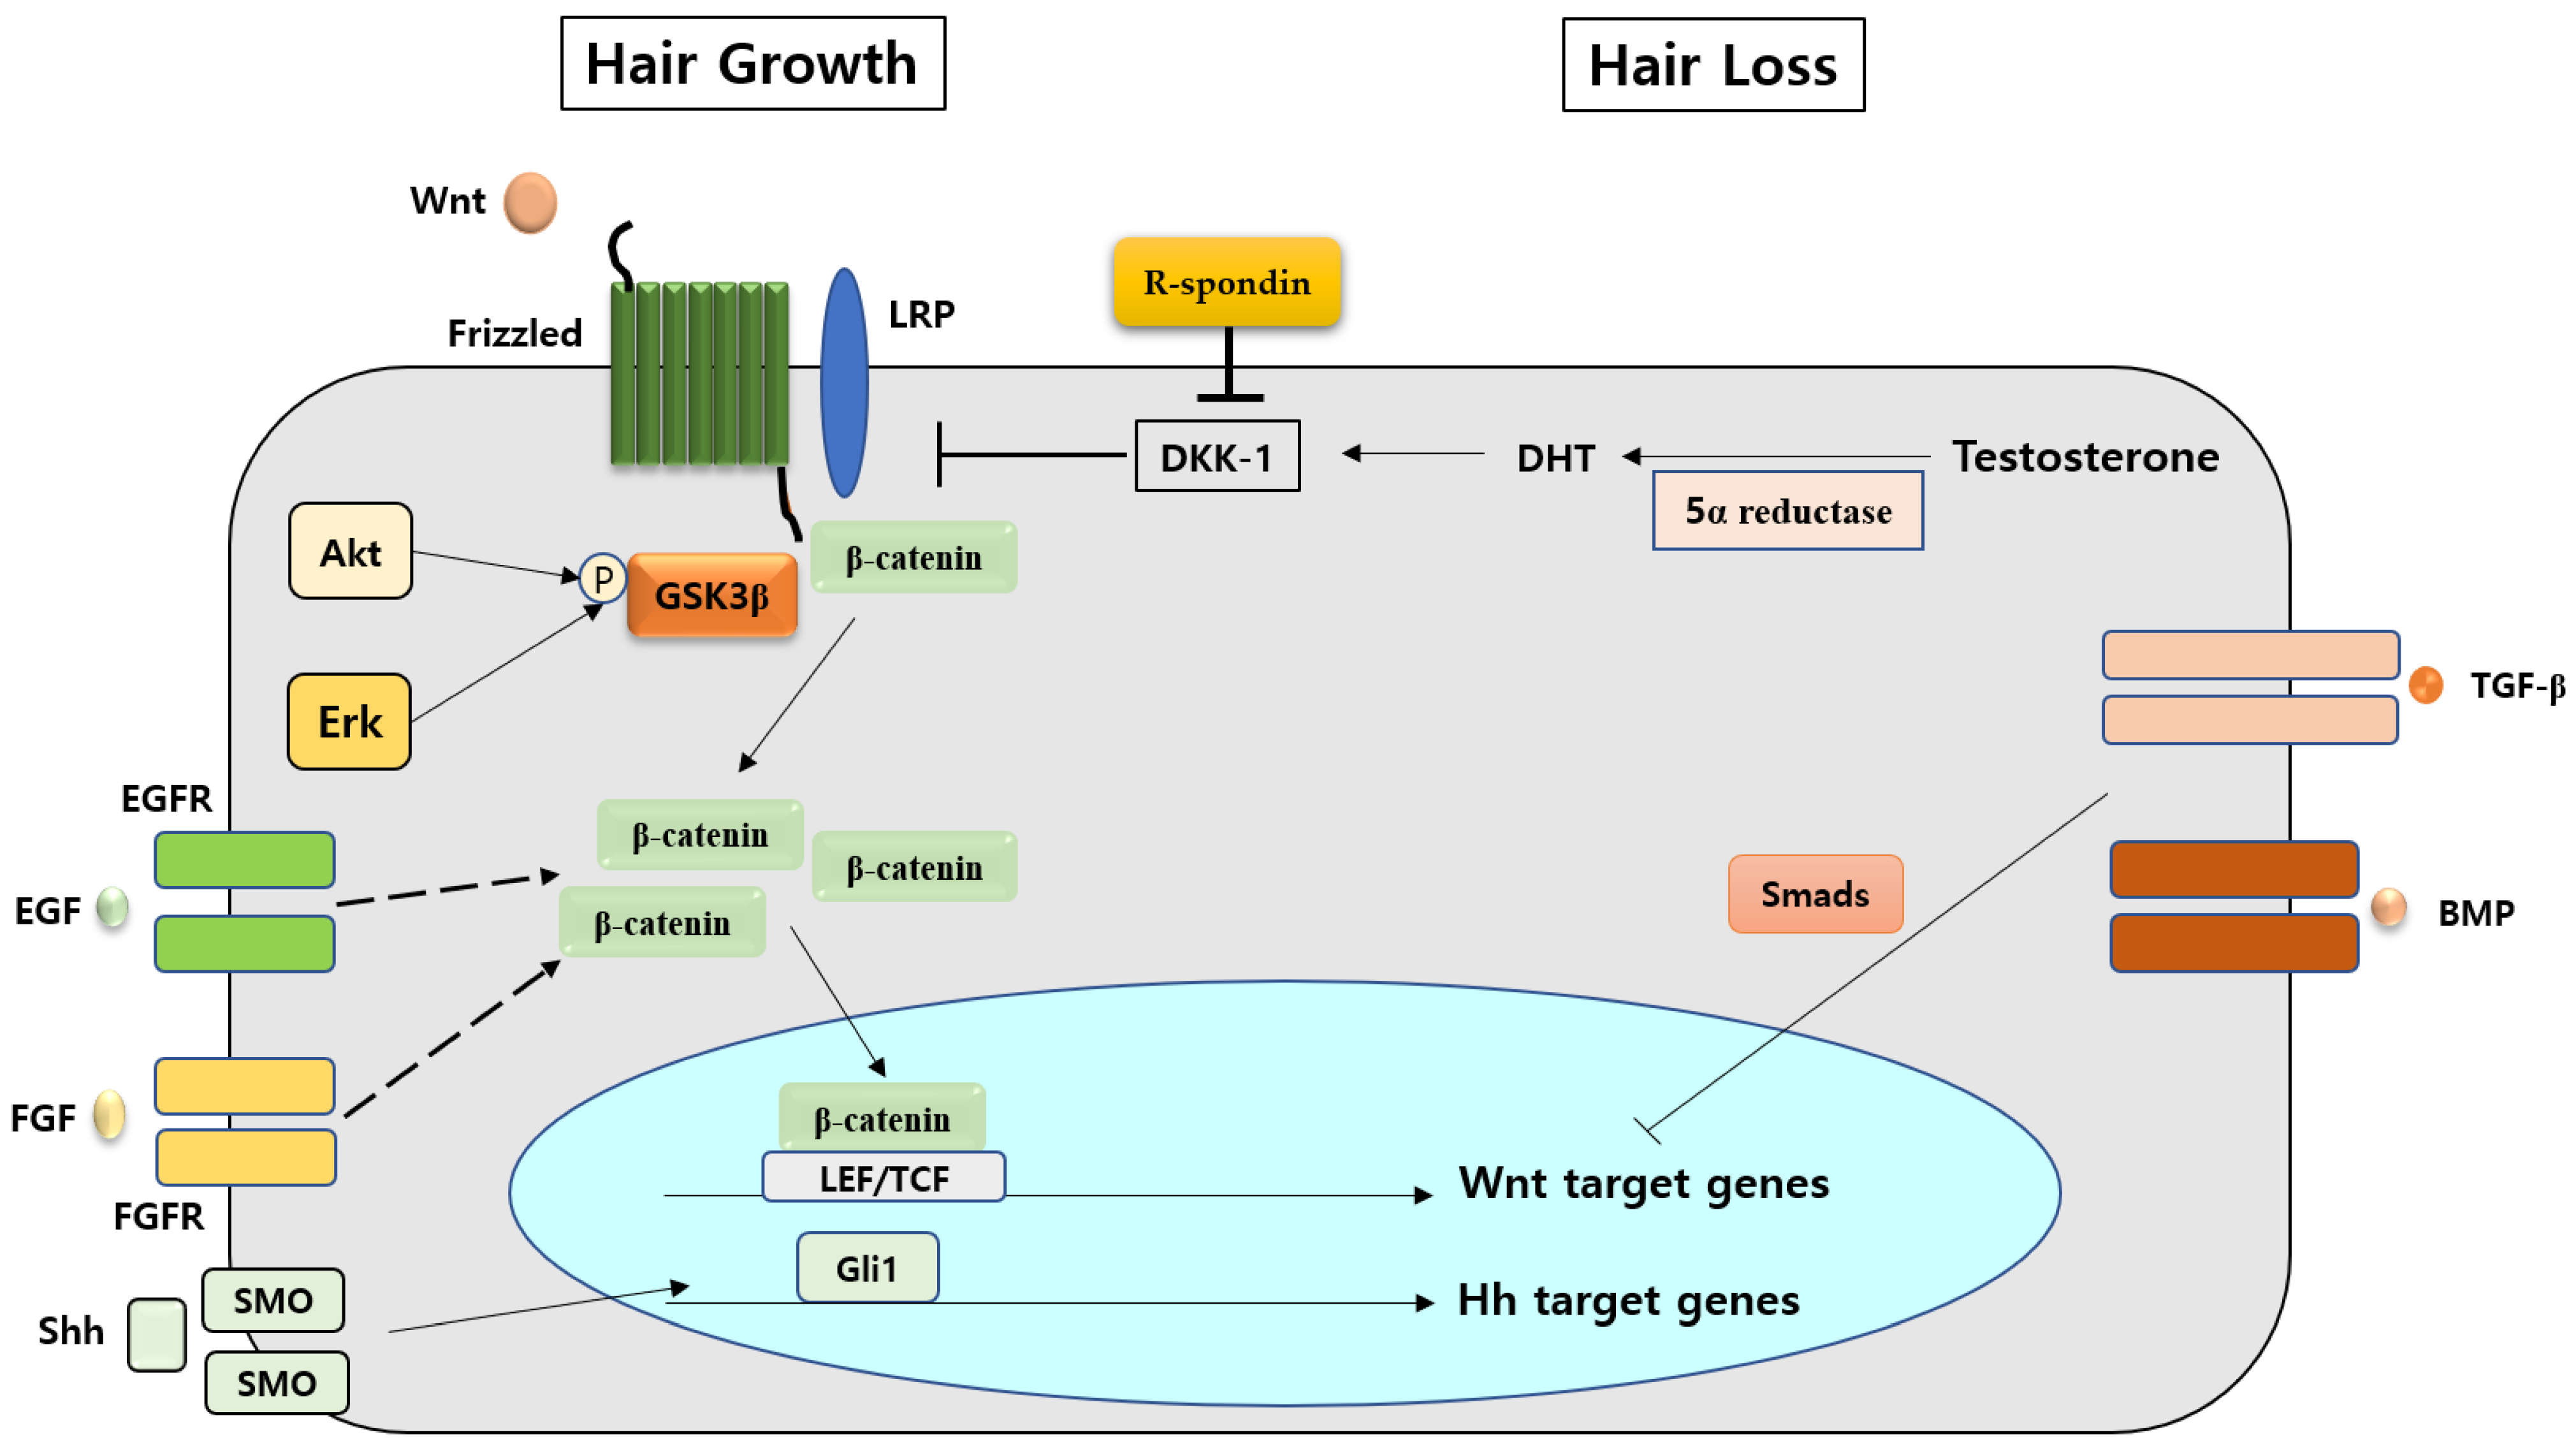 Life | Free Full-Text | The Molecular Mechanism of Natural Products  Activating Wnt/β-Catenin Signaling Pathway for Improving Hair Loss